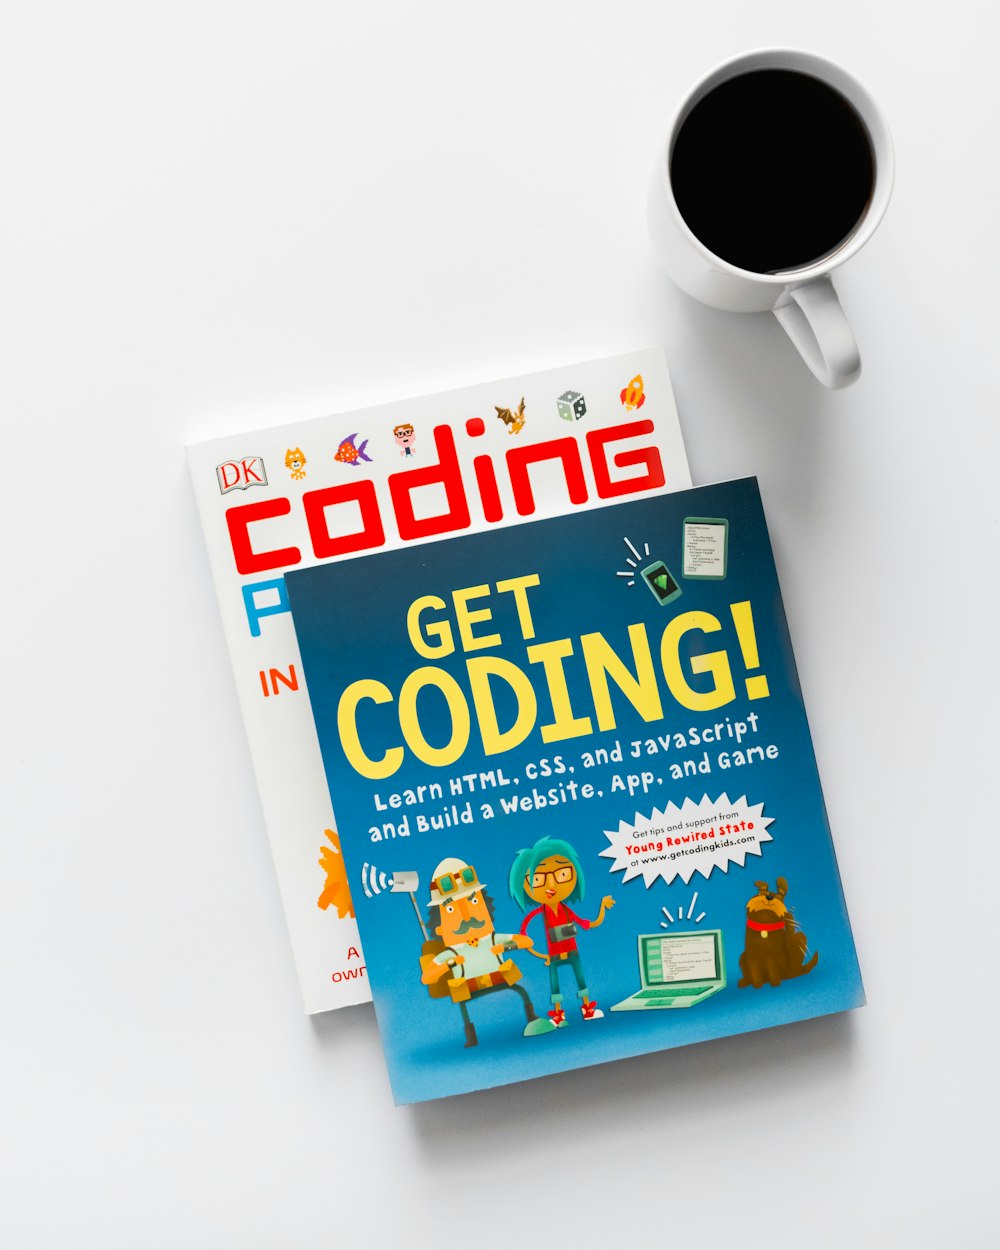 Get Coding and Coding books beside cup of coffee